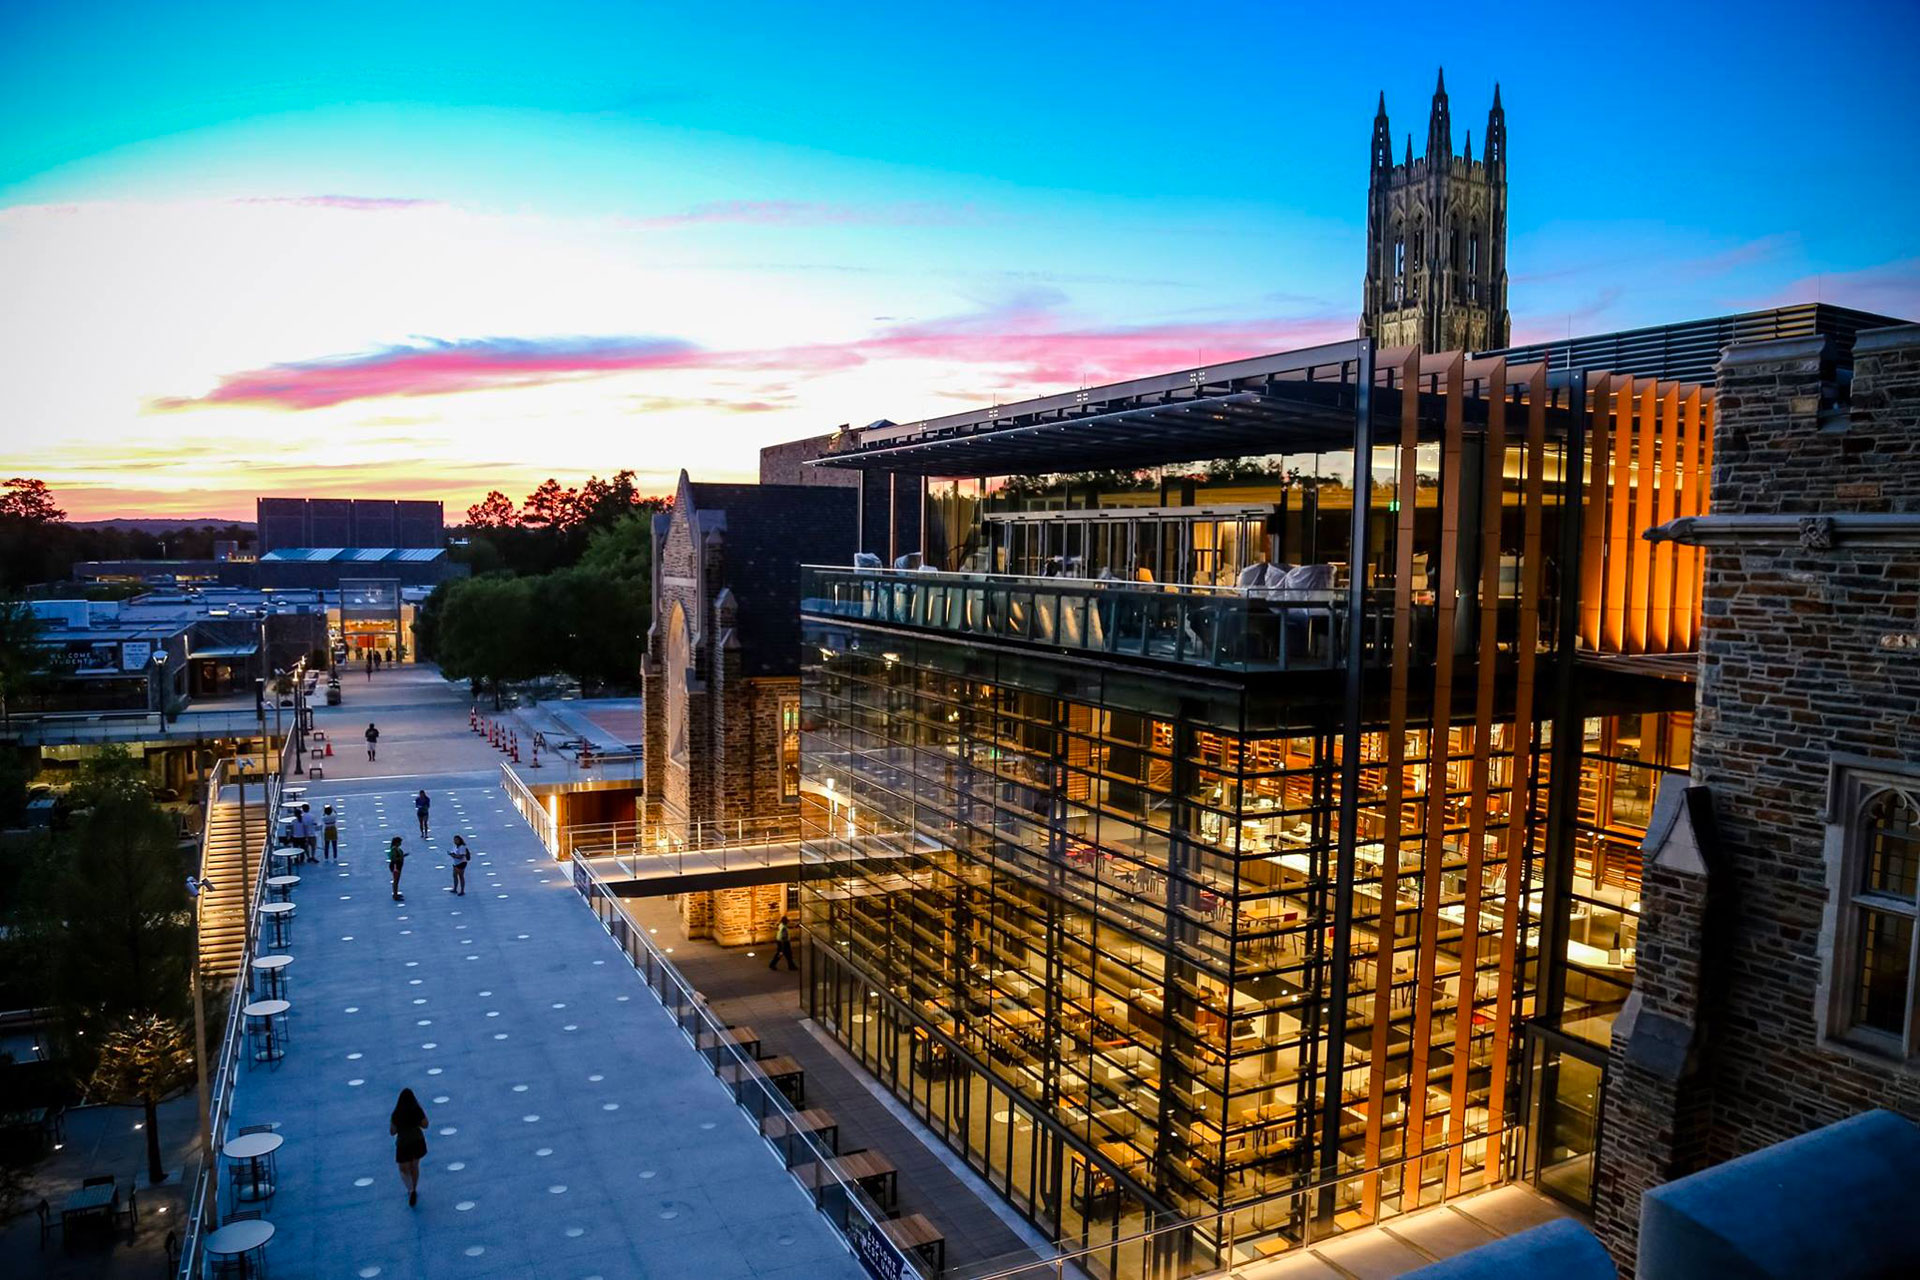 Brodhead Center at sunset with Duke Chapel in the background